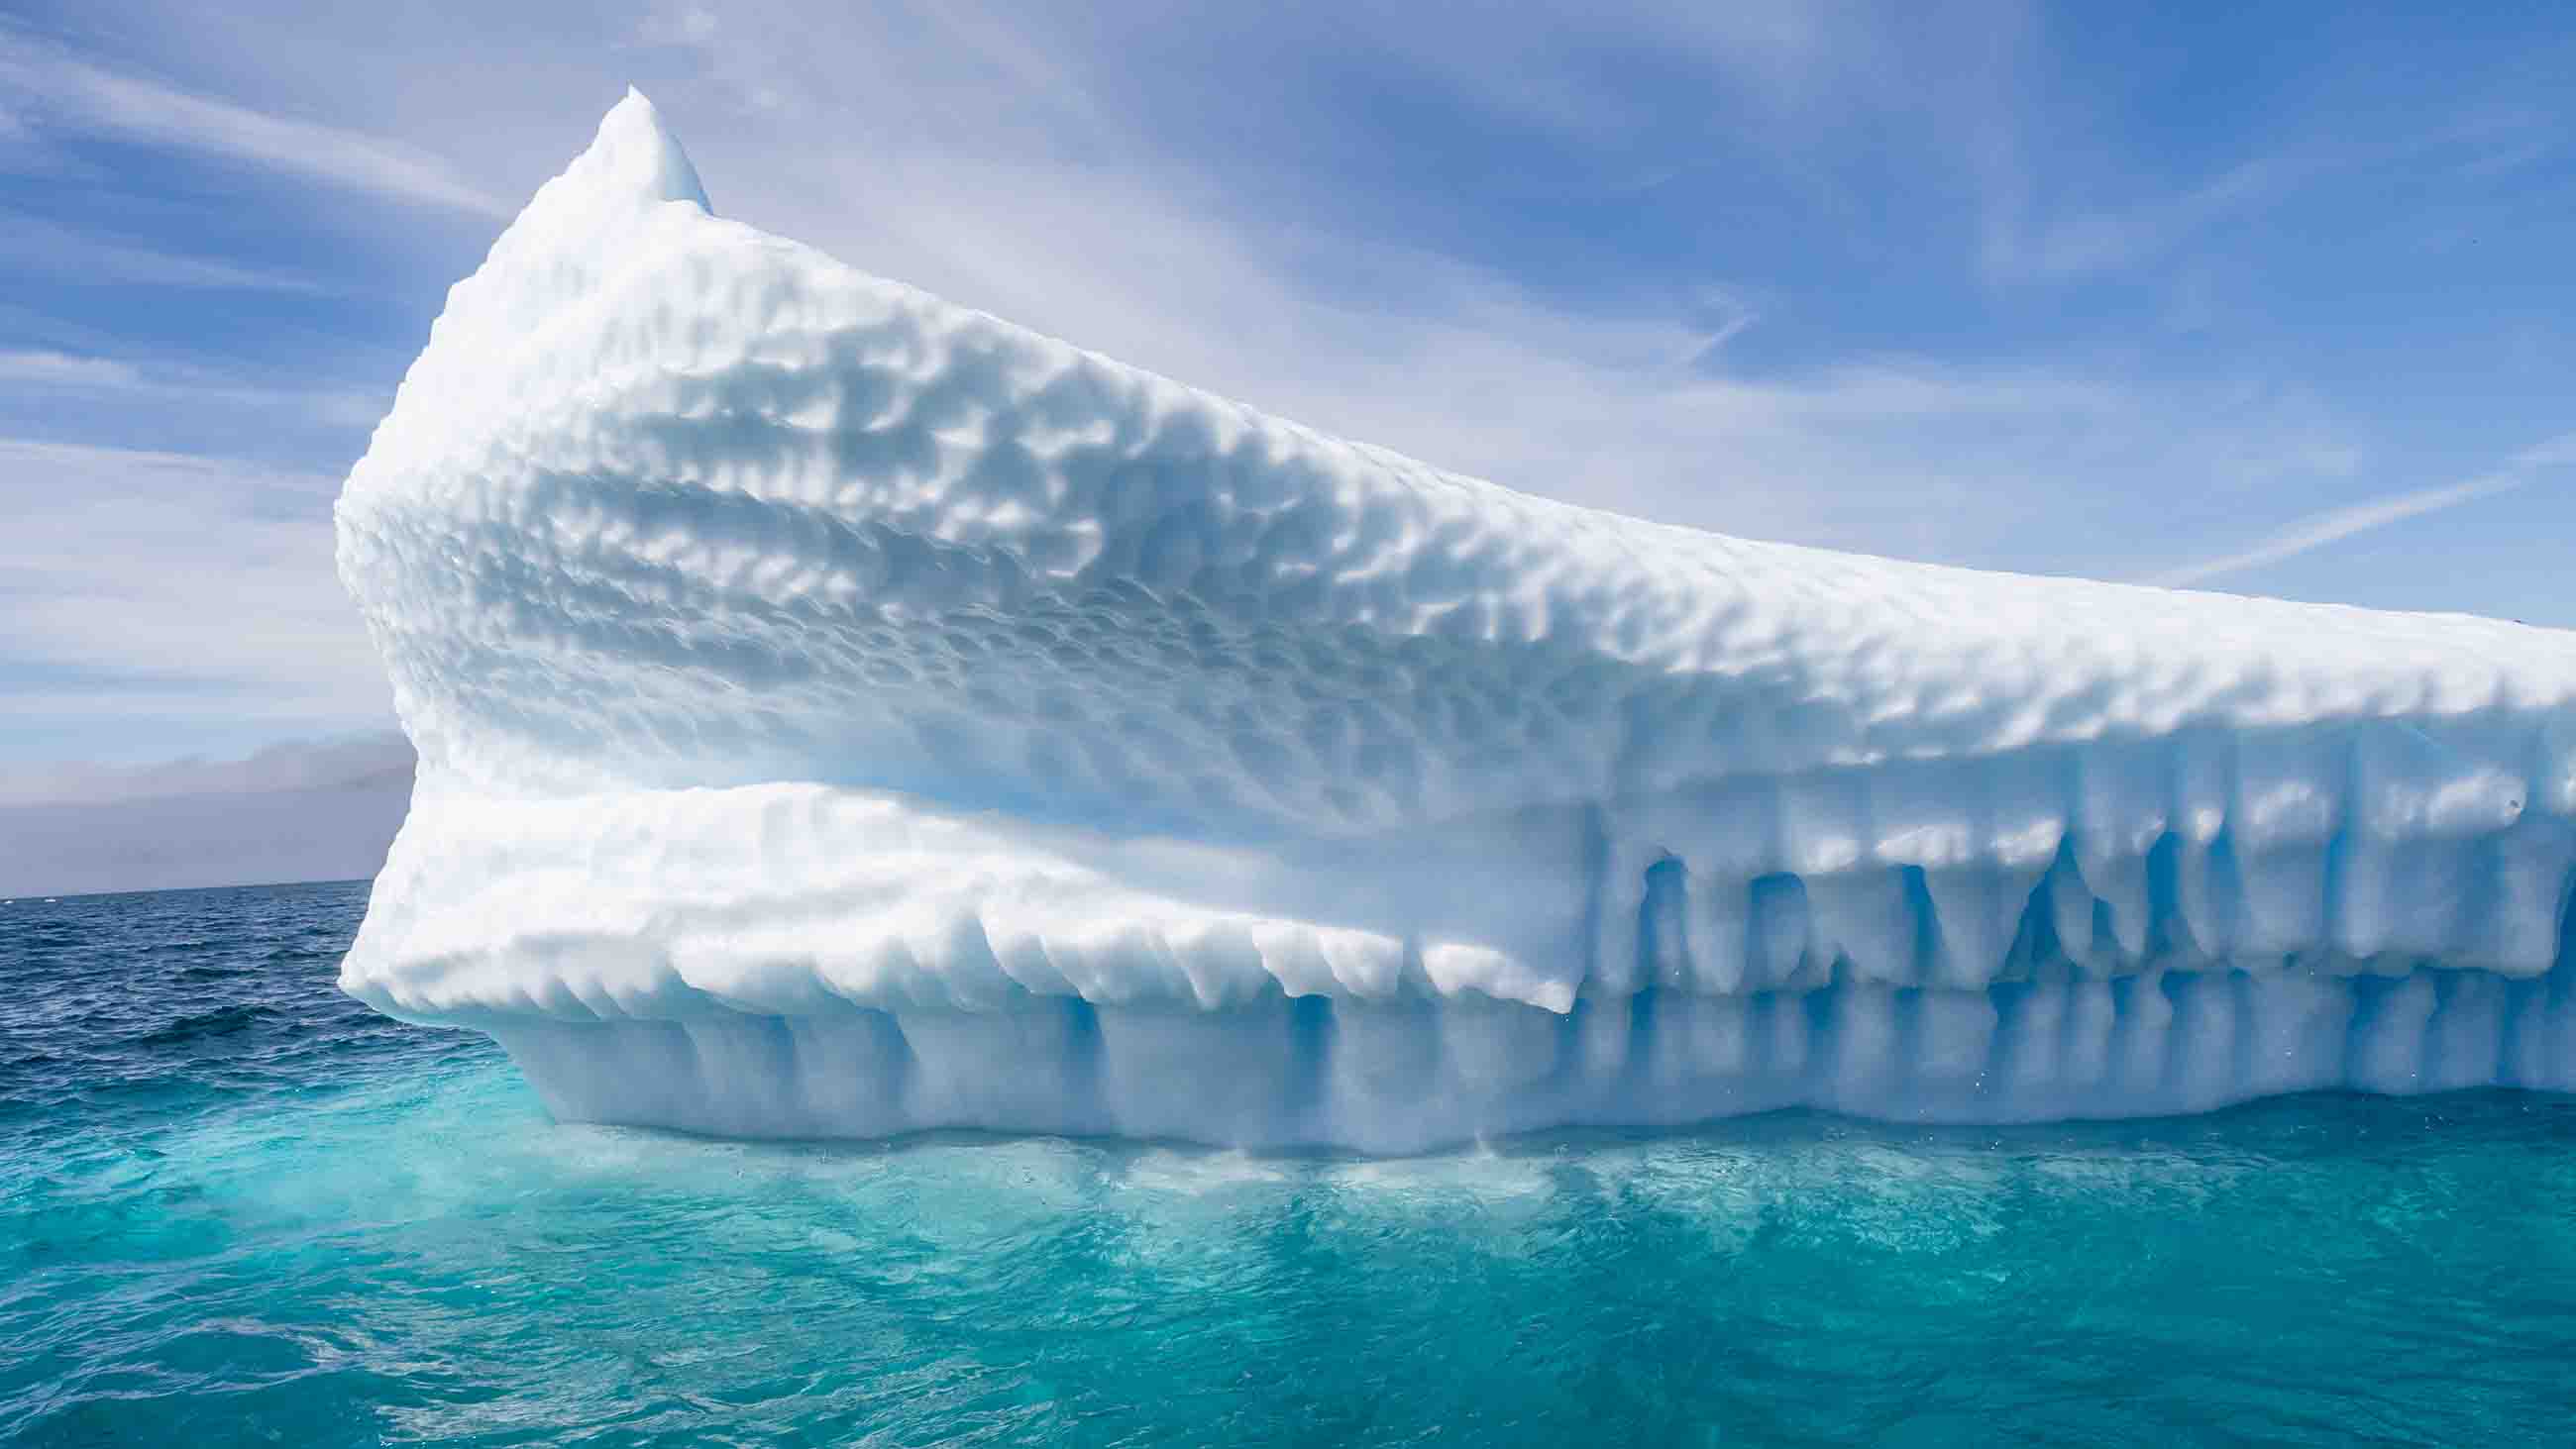 One of the largest recorded icebergs could pose a threat to cruise ships traveling from South America.